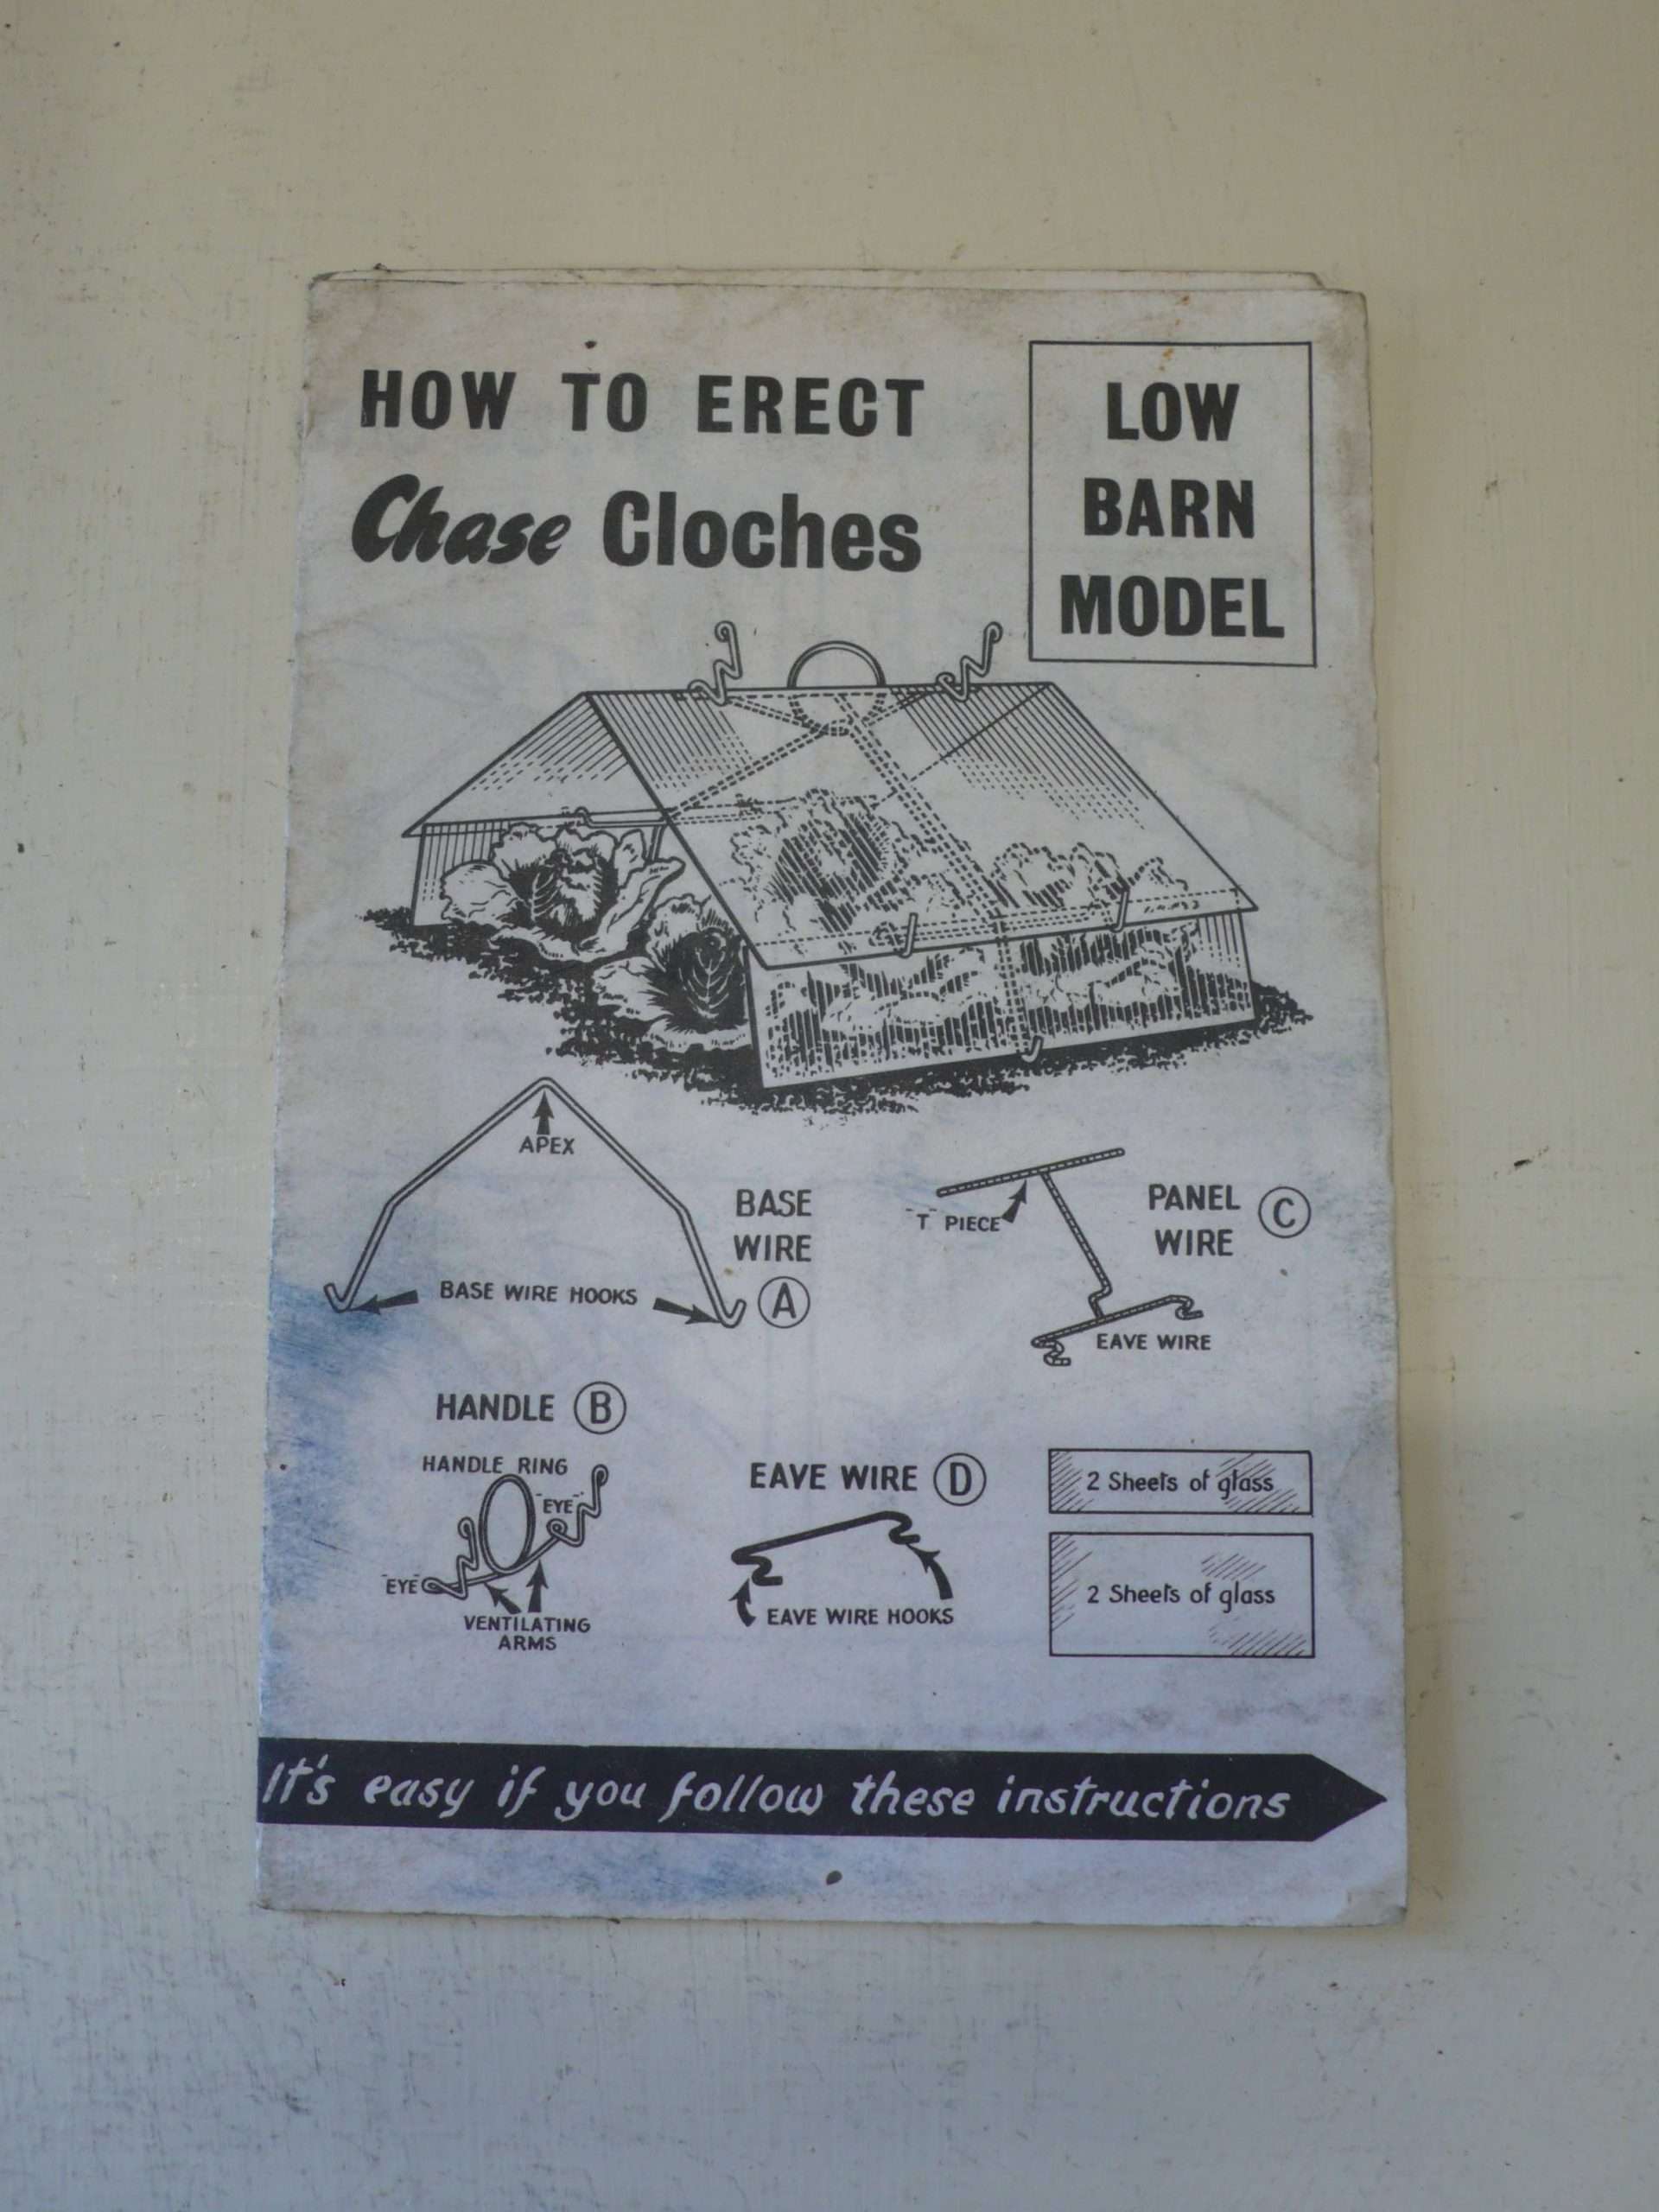 How to Erect Chase Cloches Leaflet